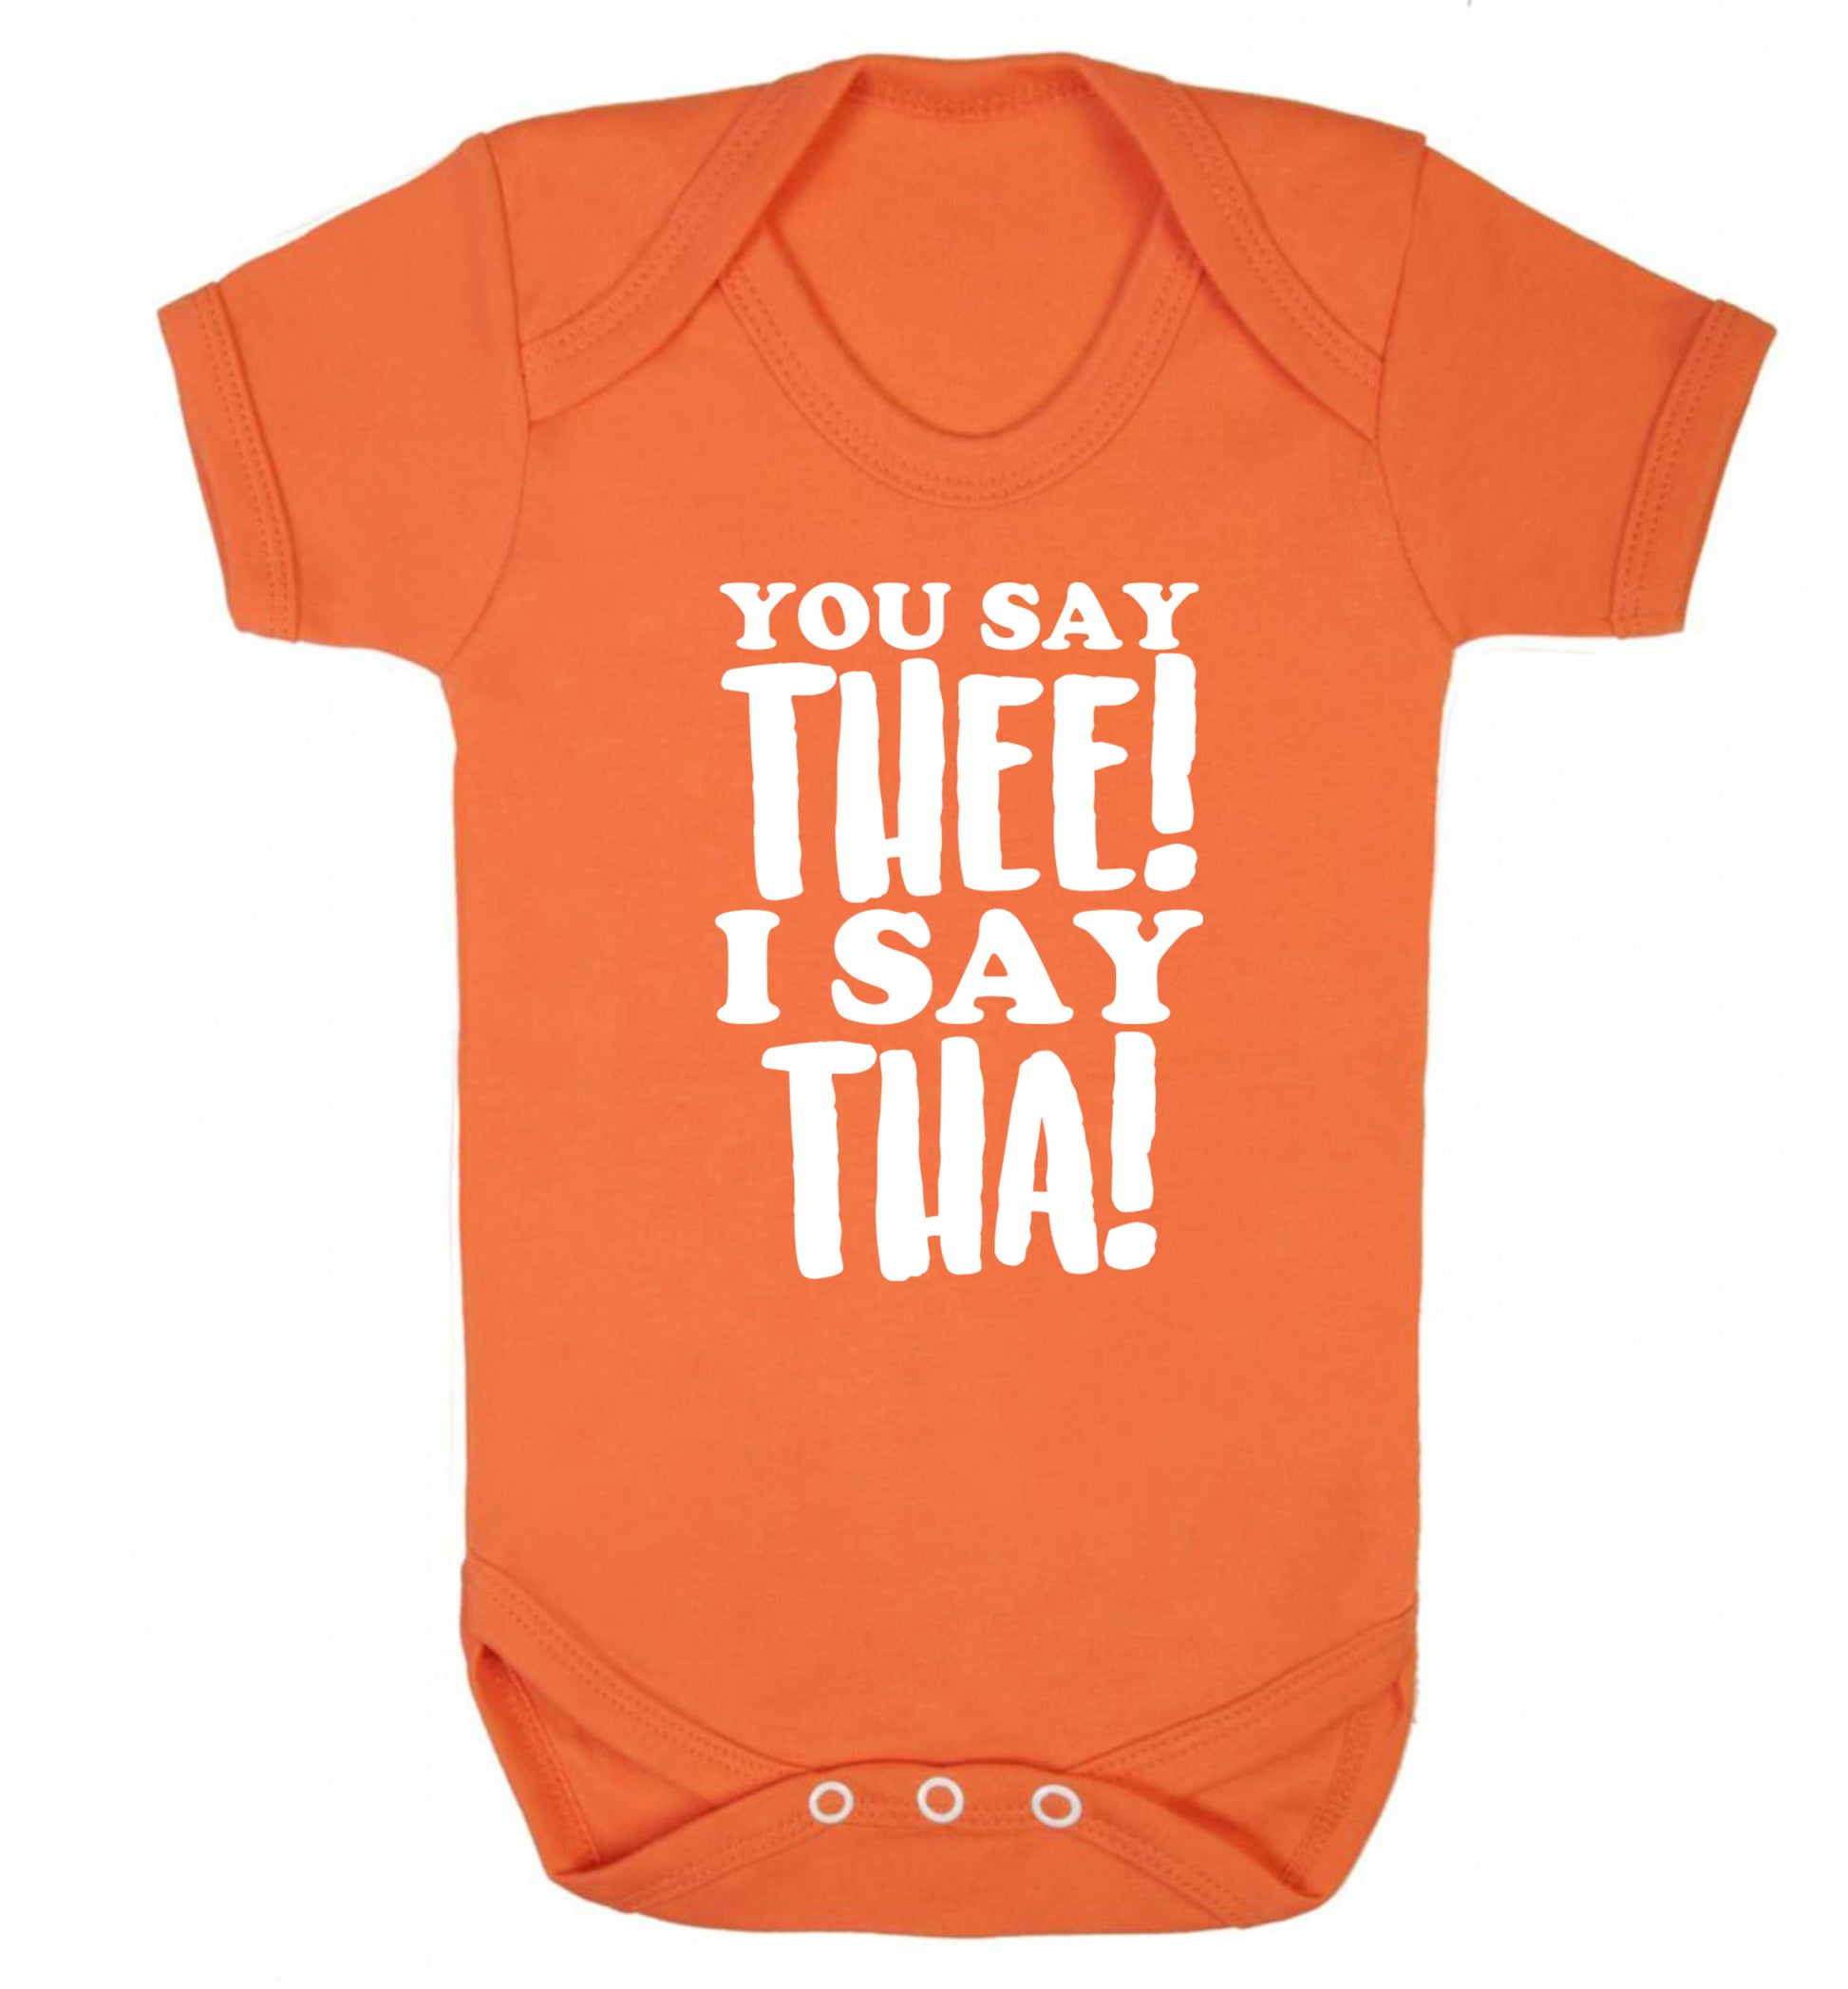 You say thee I say tha Baby Vest orange 18-24 months